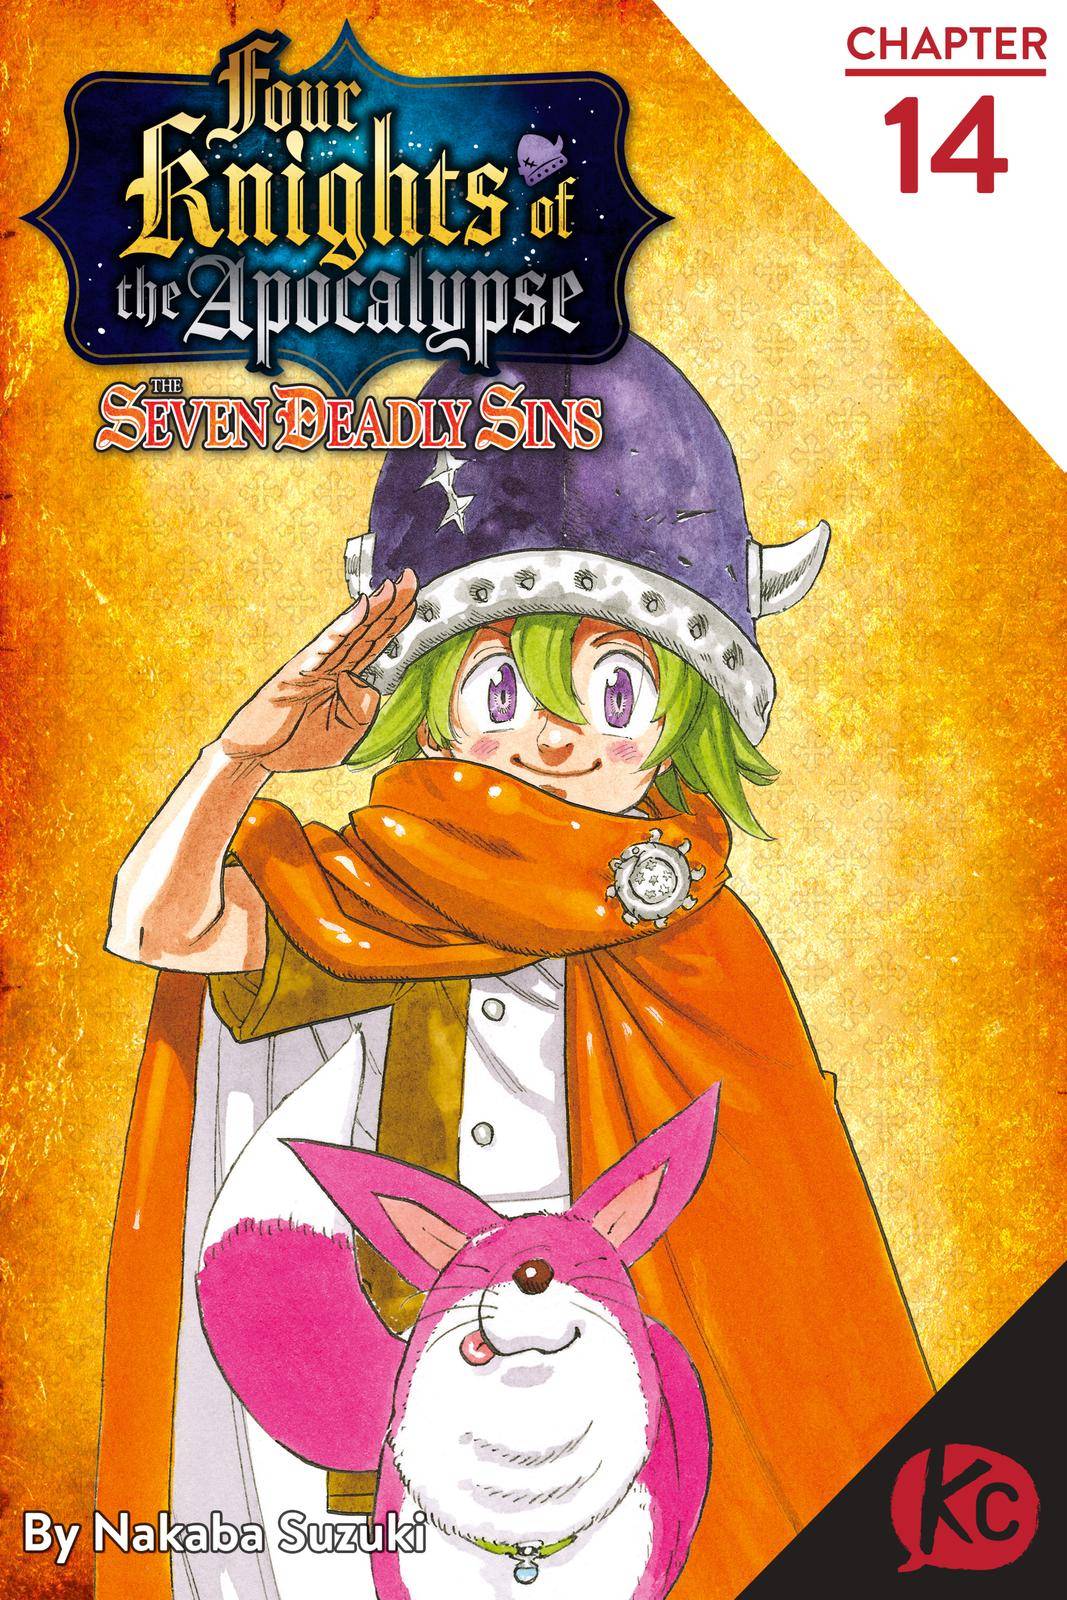 The Seven Deadly Sins: Four Knights of the Apocalypse Chapter 14